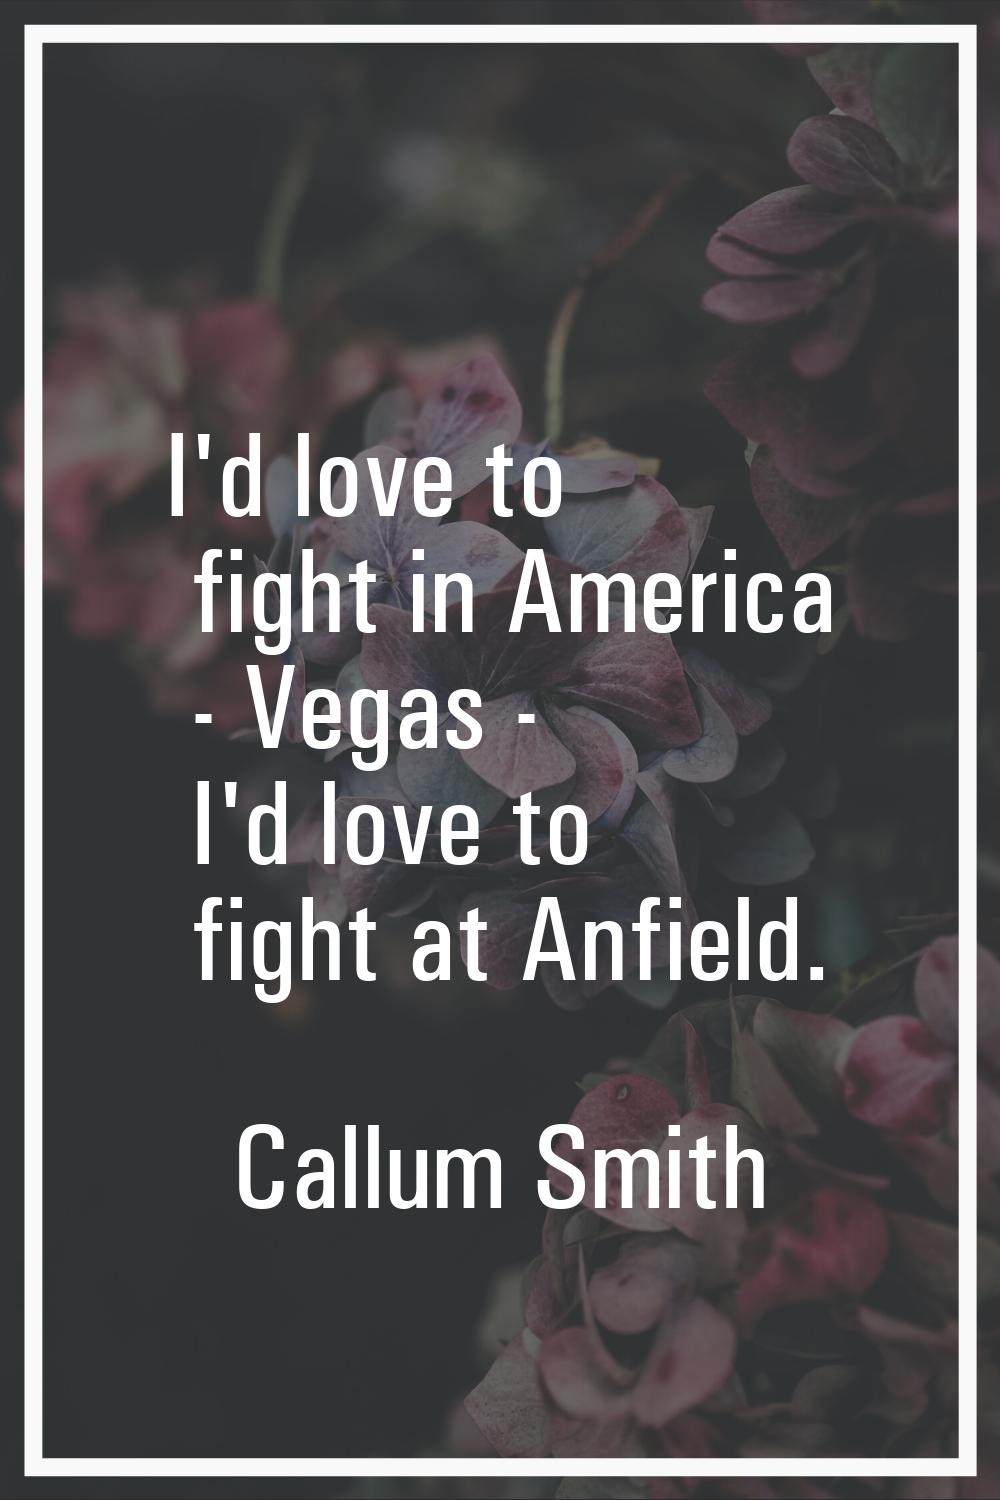 I'd love to fight in America - Vegas - I'd love to fight at Anfield.